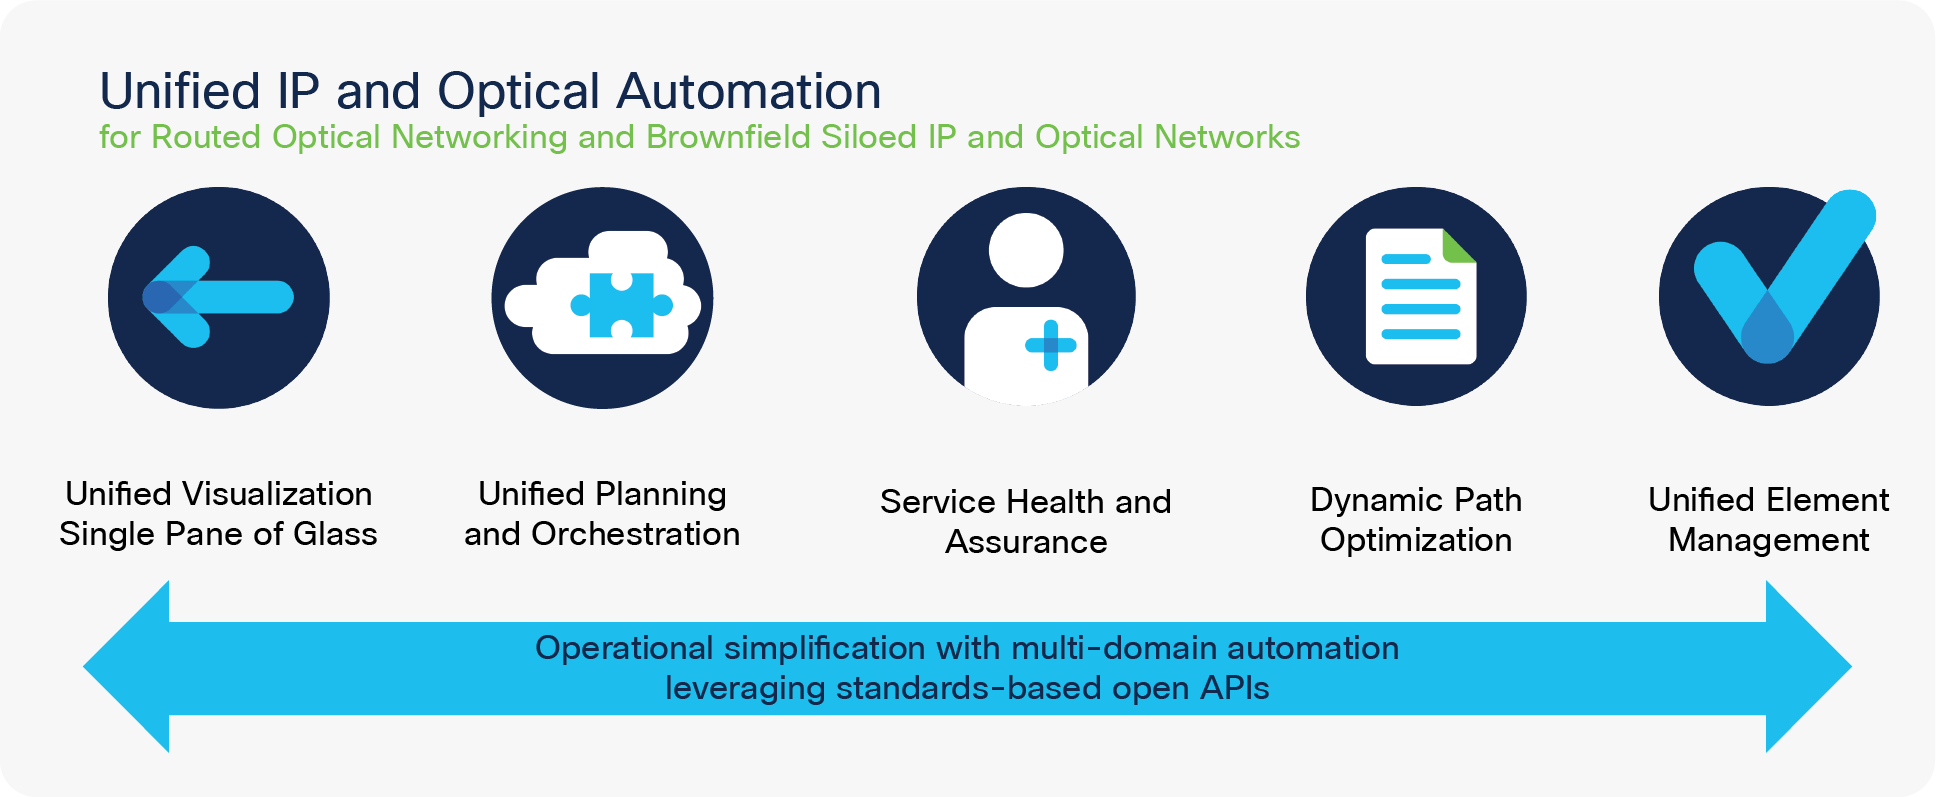 Cisco’s Routed Optical Networking automation key functions